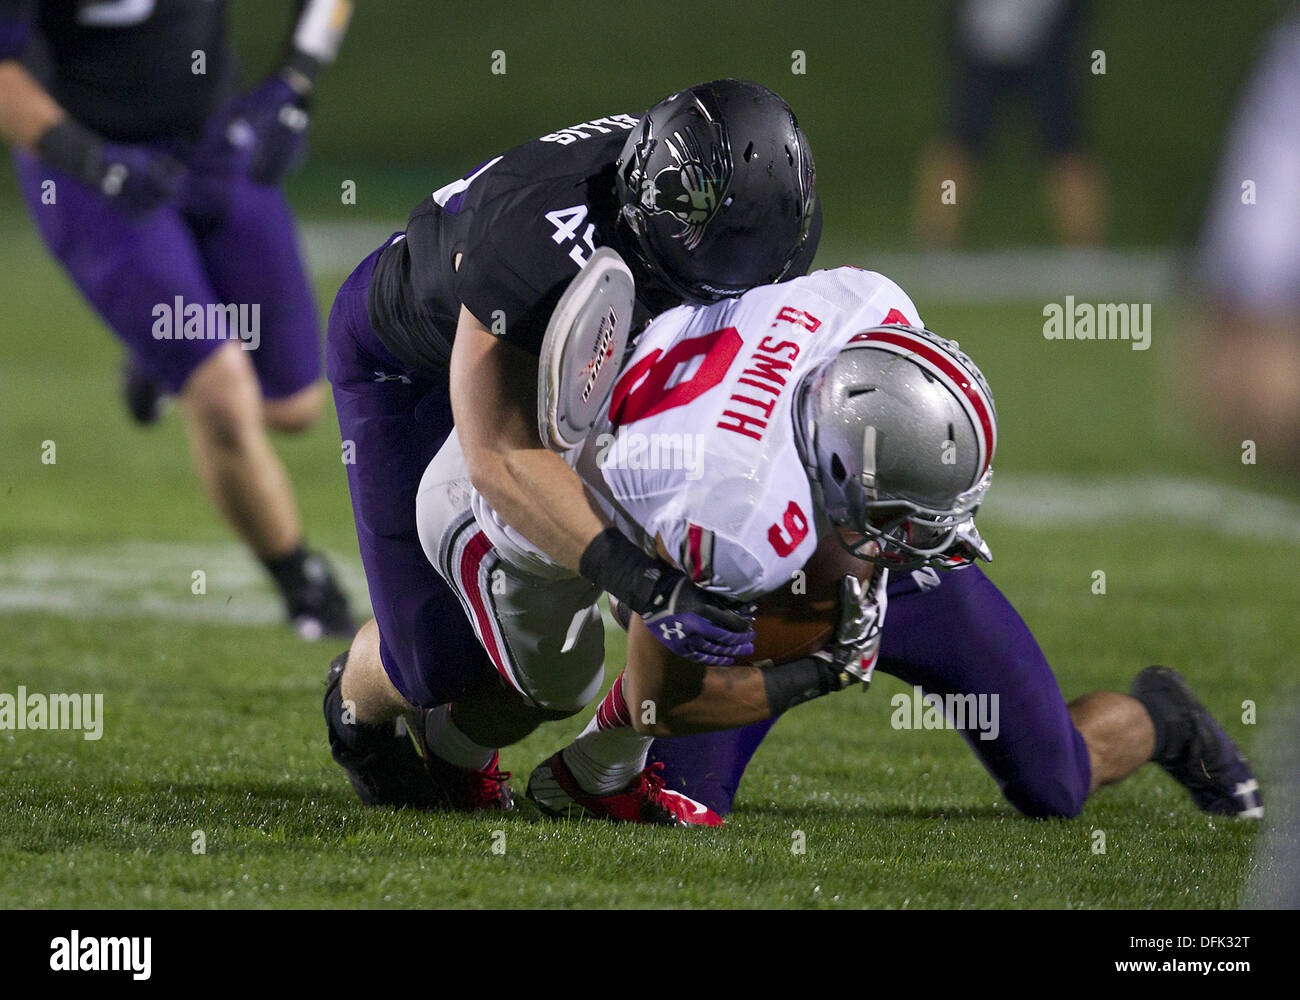 Evanston, Illinois, USA. 5th Oct, 2013. October 05, 2013: Ohio State wide receiver Devin Smith (9) is tackled by Northwestern linebacker Collin Ellis (45) during NCAA Football game action between the Ohio State Buckeyes and the Northwestern Wildcats at Ryan Field in Evanston, Illinois. Ohio State defeated Northwestern 40-30. Credit:  csm/Alamy Live News Stock Photo